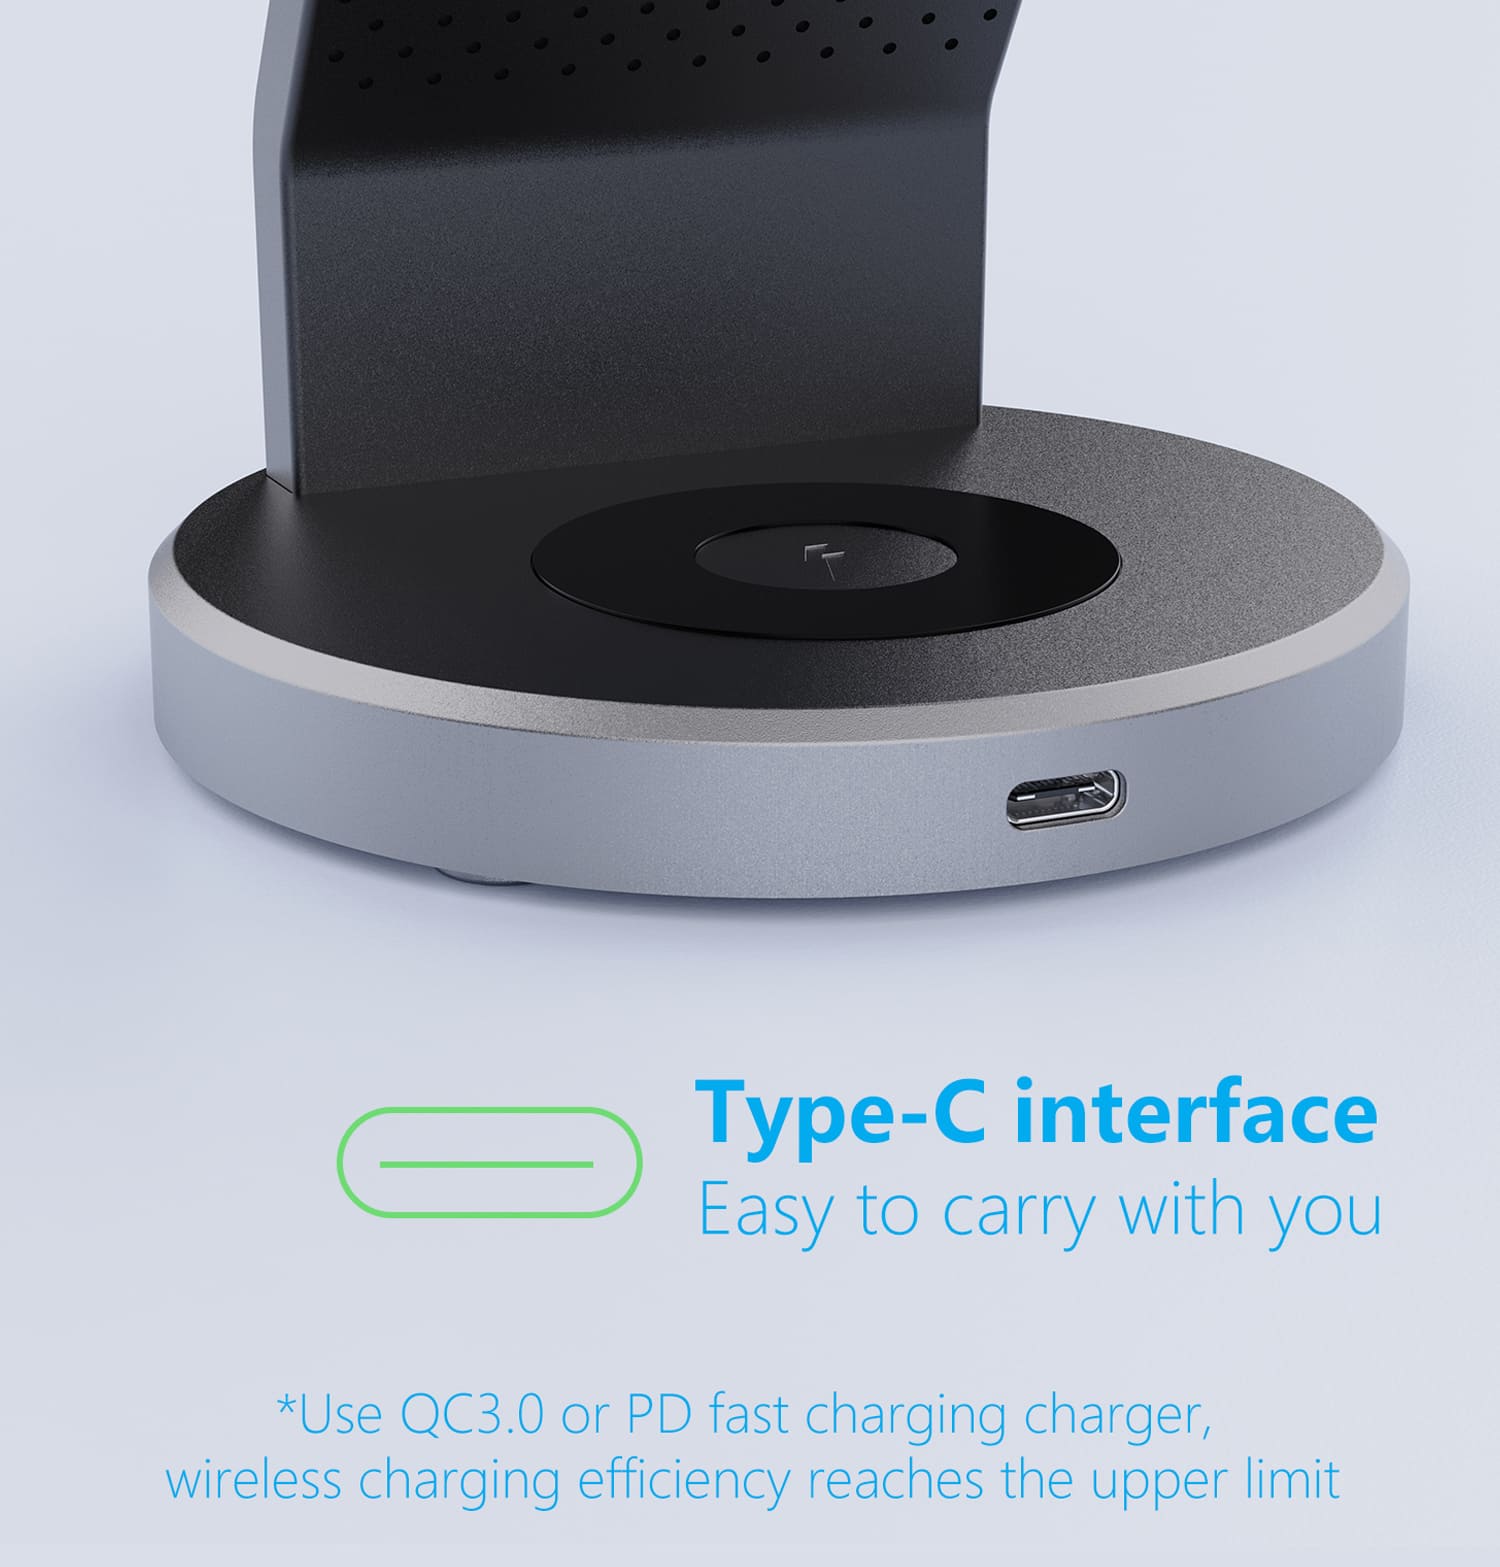 Budi 3 in 1 Magnetic Wireless Charger, Portable Wireless Charging Station